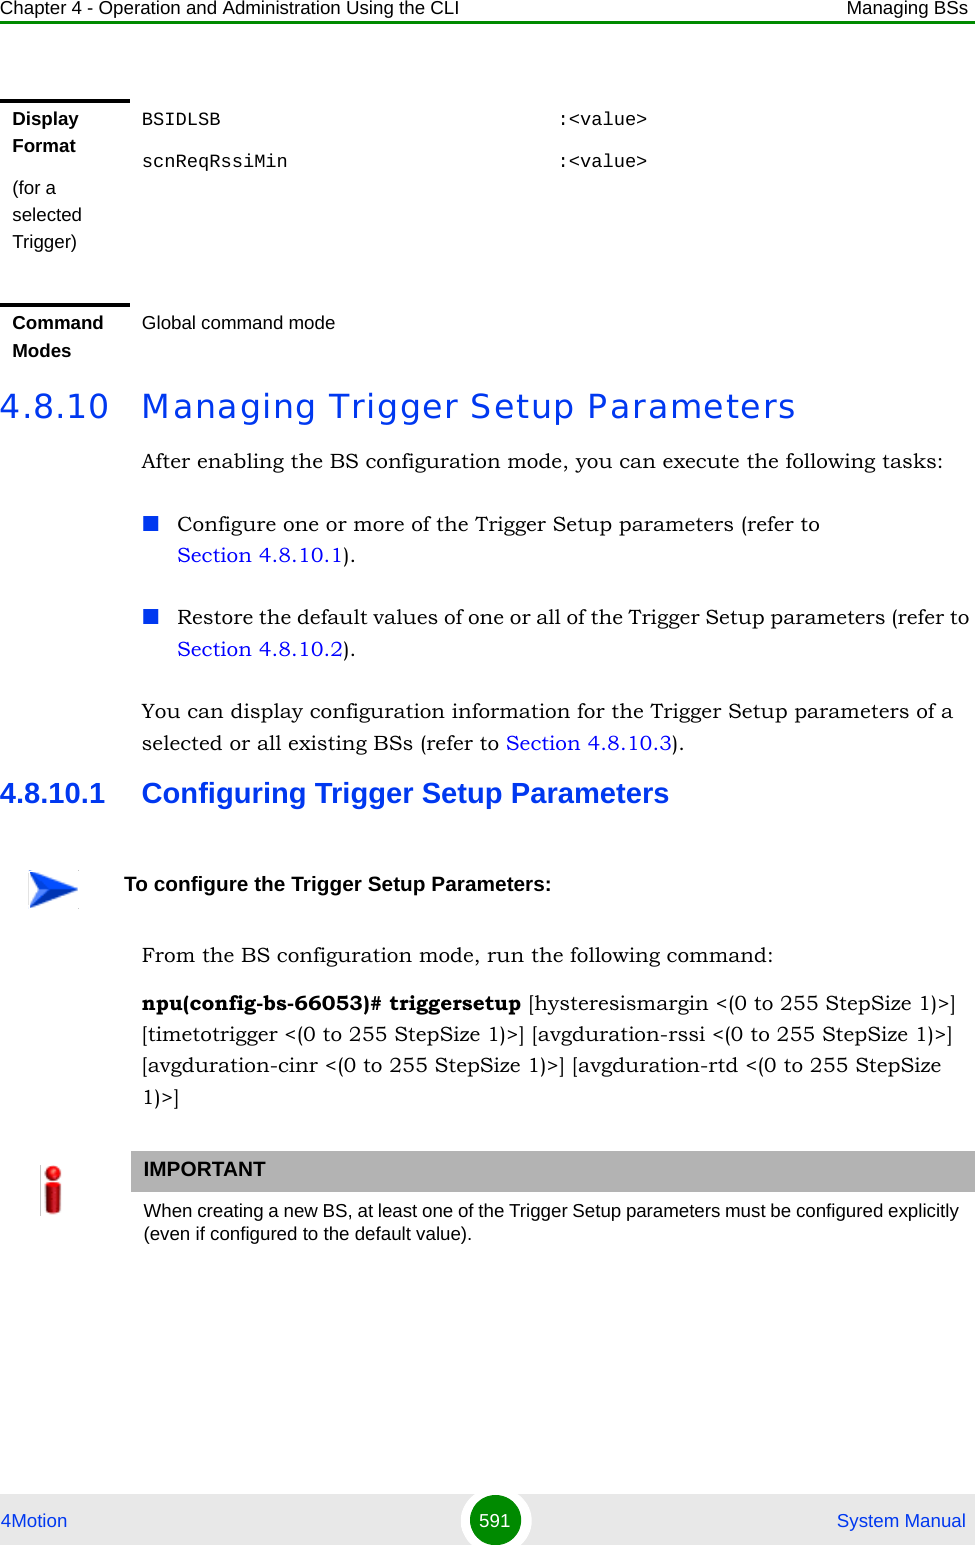 Chapter 4 - Operation and Administration Using the CLI Managing BSs4Motion 591  System Manual4.8.10 Managing Trigger Setup ParametersAfter enabling the BS configuration mode, you can execute the following tasks:Configure one or more of the Trigger Setup parameters (refer to Section 4.8.10.1).Restore the default values of one or all of the Trigger Setup parameters (refer to Section 4.8.10.2).You can display configuration information for the Trigger Setup parameters of a selected or all existing BSs (refer to Section 4.8.10.3).4.8.10.1 Configuring Trigger Setup ParametersFrom the BS configuration mode, run the following command:npu(config-bs-66053)# triggersetup [hysteresismargin &lt;(0 to 255 StepSize 1)&gt;] [timetotrigger &lt;(0 to 255 StepSize 1)&gt;] [avgduration-rssi &lt;(0 to 255 StepSize 1)&gt;] [avgduration-cinr &lt;(0 to 255 StepSize 1)&gt;] [avgduration-rtd &lt;(0 to 255 StepSize 1)&gt;]Display Format(for a selected Trigger)BSIDLSB                              :&lt;value&gt;scnReqRssiMin                        :&lt;value&gt;Command ModesGlobal command modeTo configure the Trigger Setup Parameters:IMPORTANTWhen creating a new BS, at least one of the Trigger Setup parameters must be configured explicitly (even if configured to the default value).